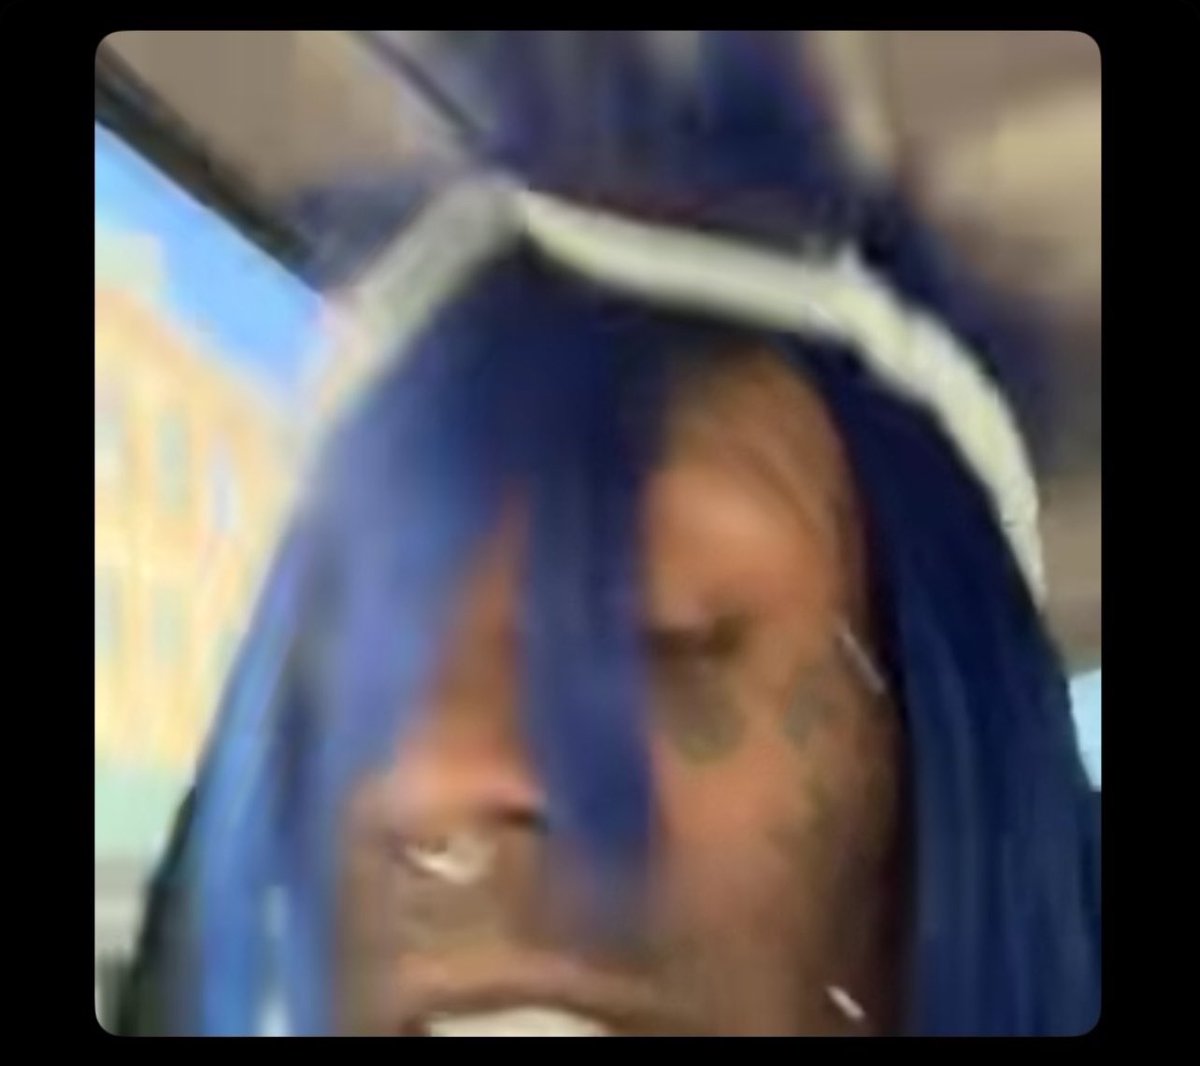 Lil Uzi Vert on FaceTime ‼️

Bro changed his hair to blue now 😭🔥